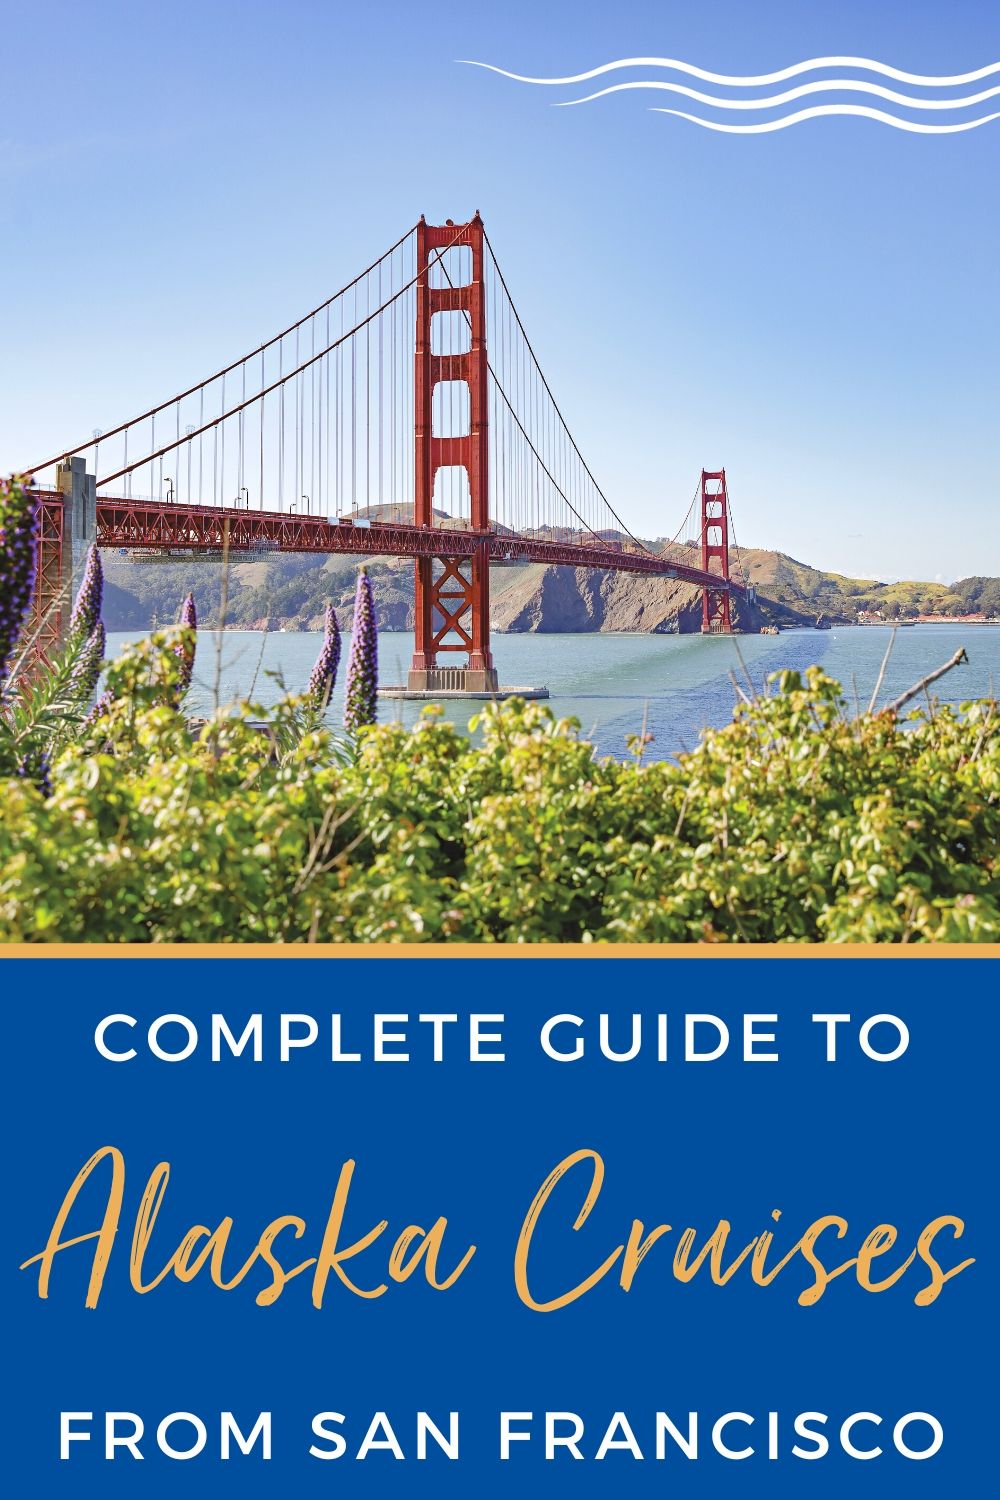 Complete Guide to Alaska Cruises From San Francisco